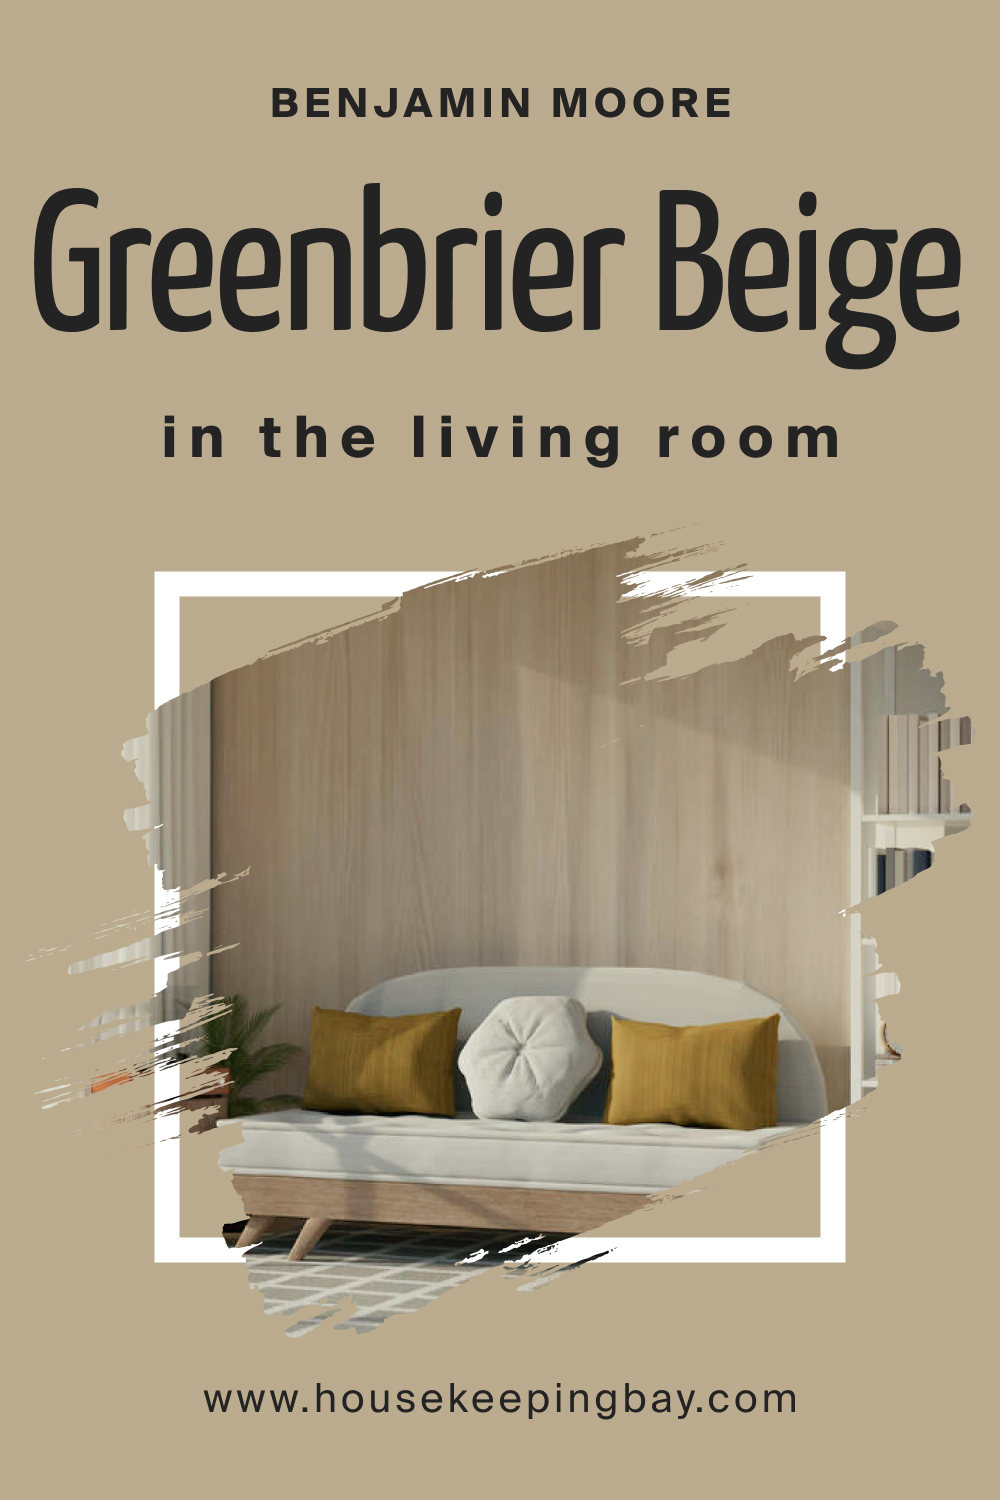 How to Use BM Greenbrier Beige HC-79 in the Living Room?